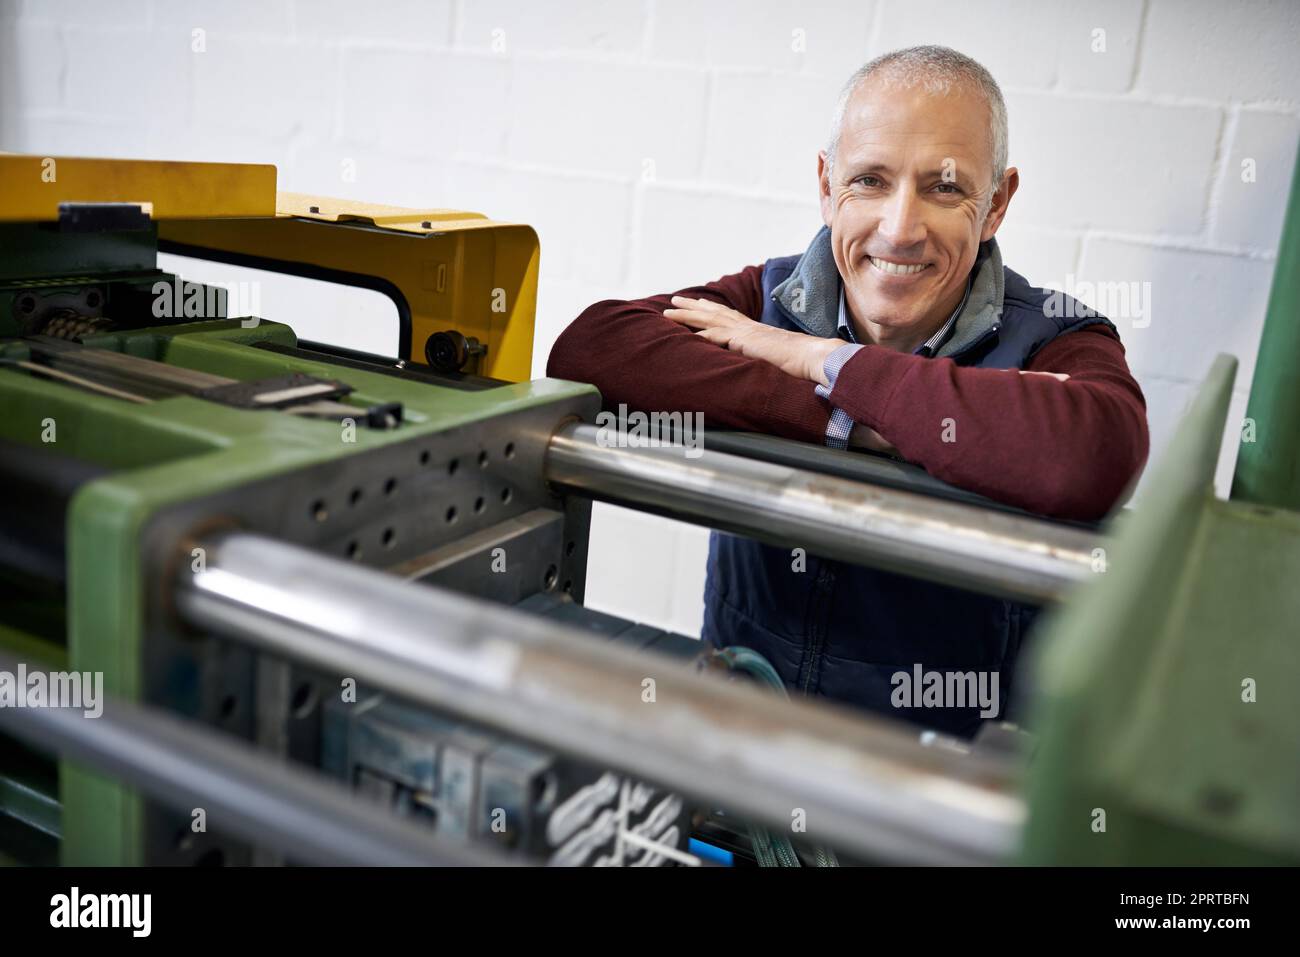 If you need something fixed, Im your man. Portrait of a mature man standing next to machinery in a factory. Stock Photo